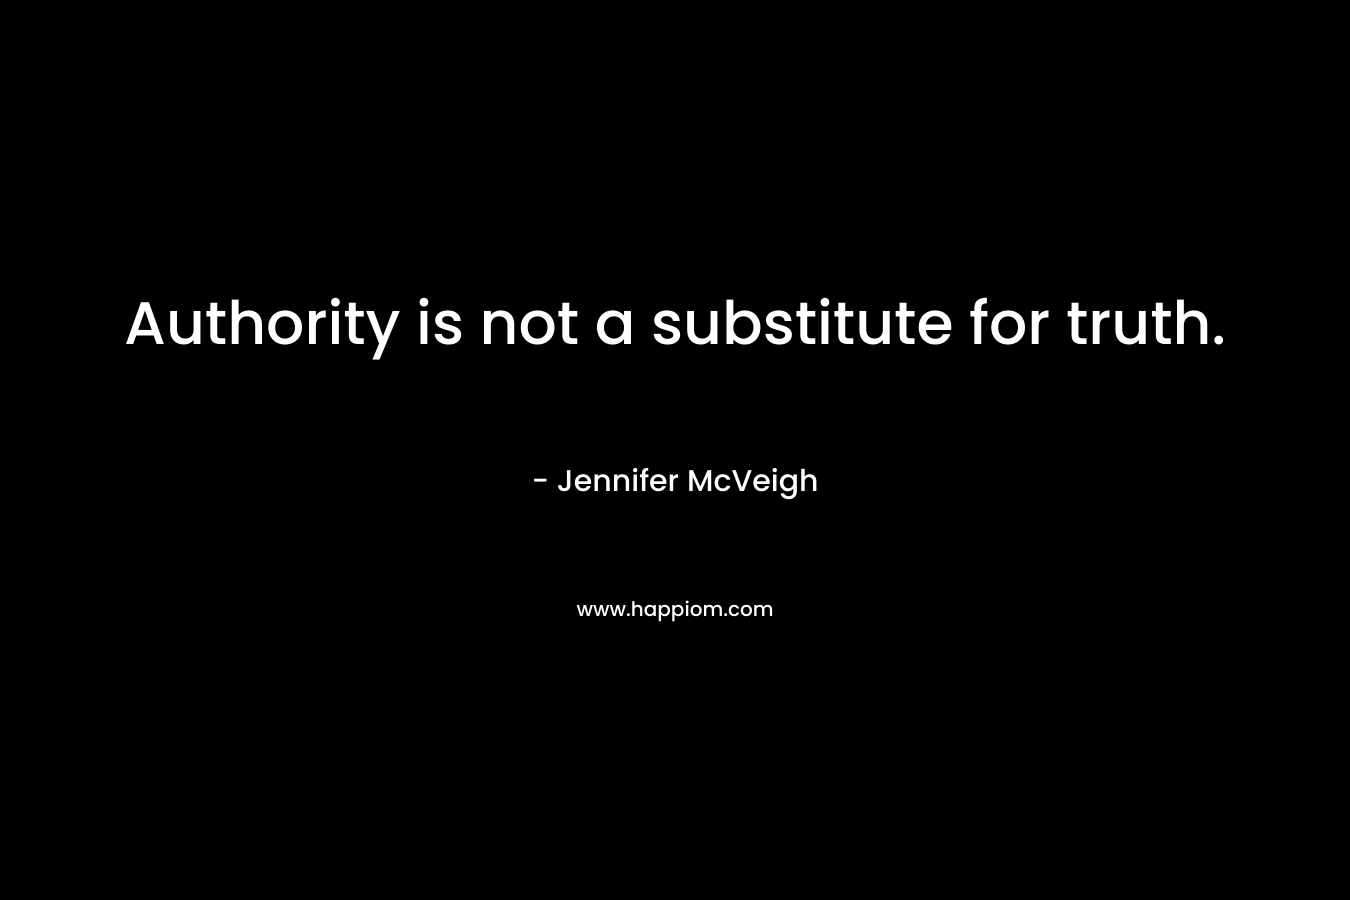 Authority is not a substitute for truth.